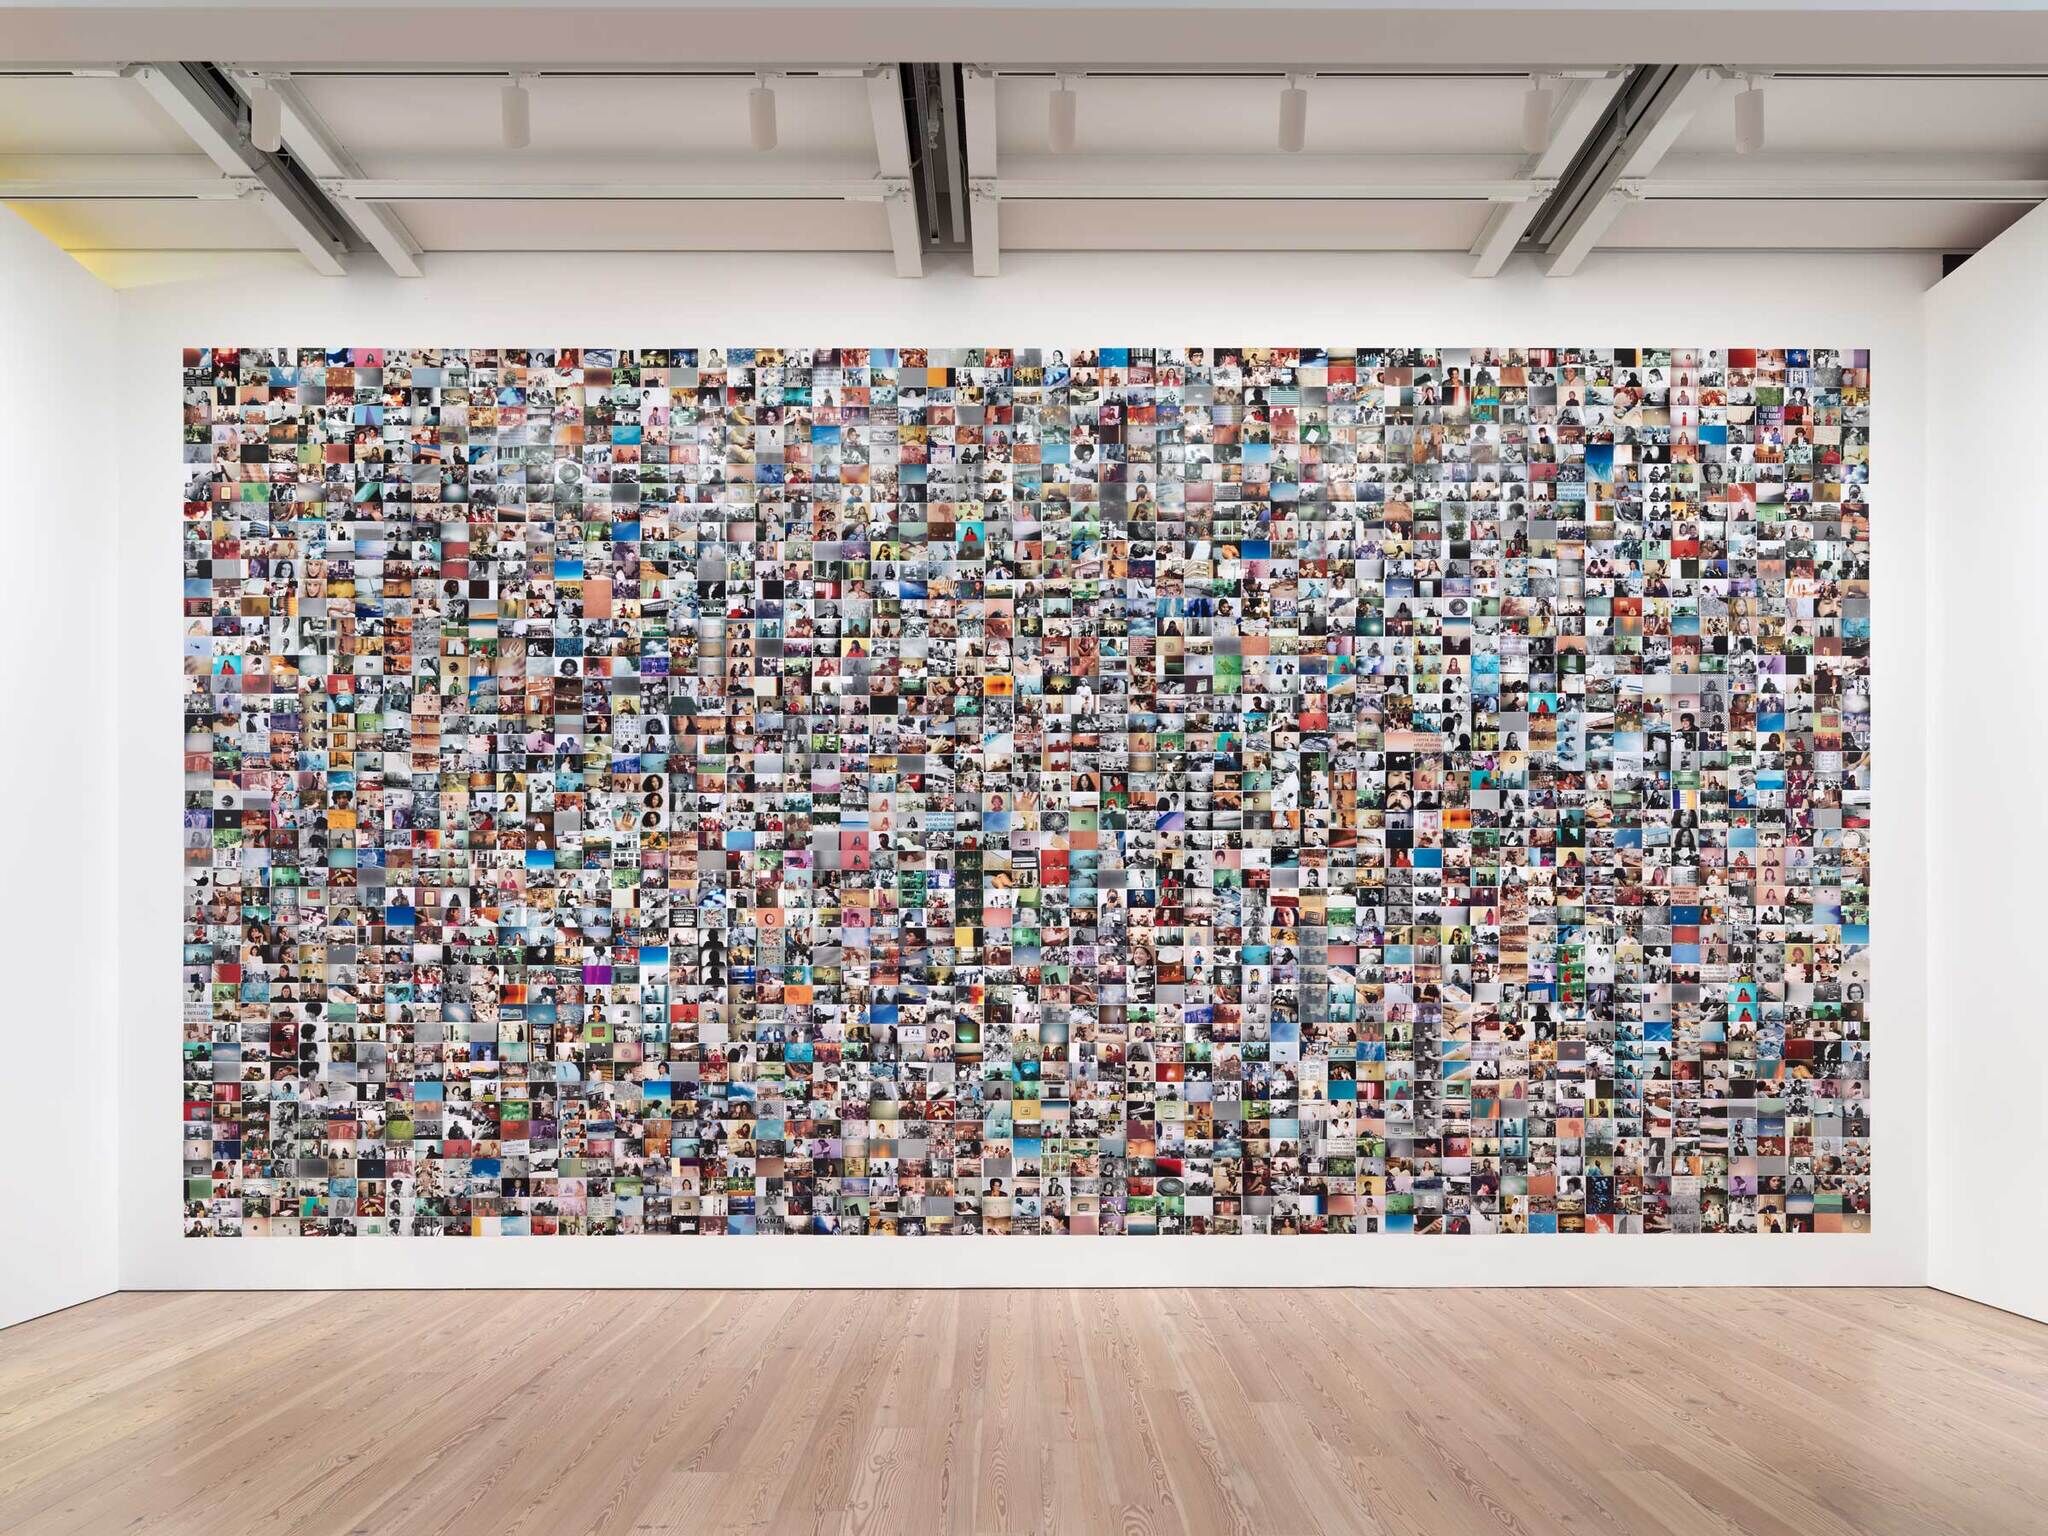 A large collage of numerous photos covering an entire gallery wall, viewed from a wooden floor.